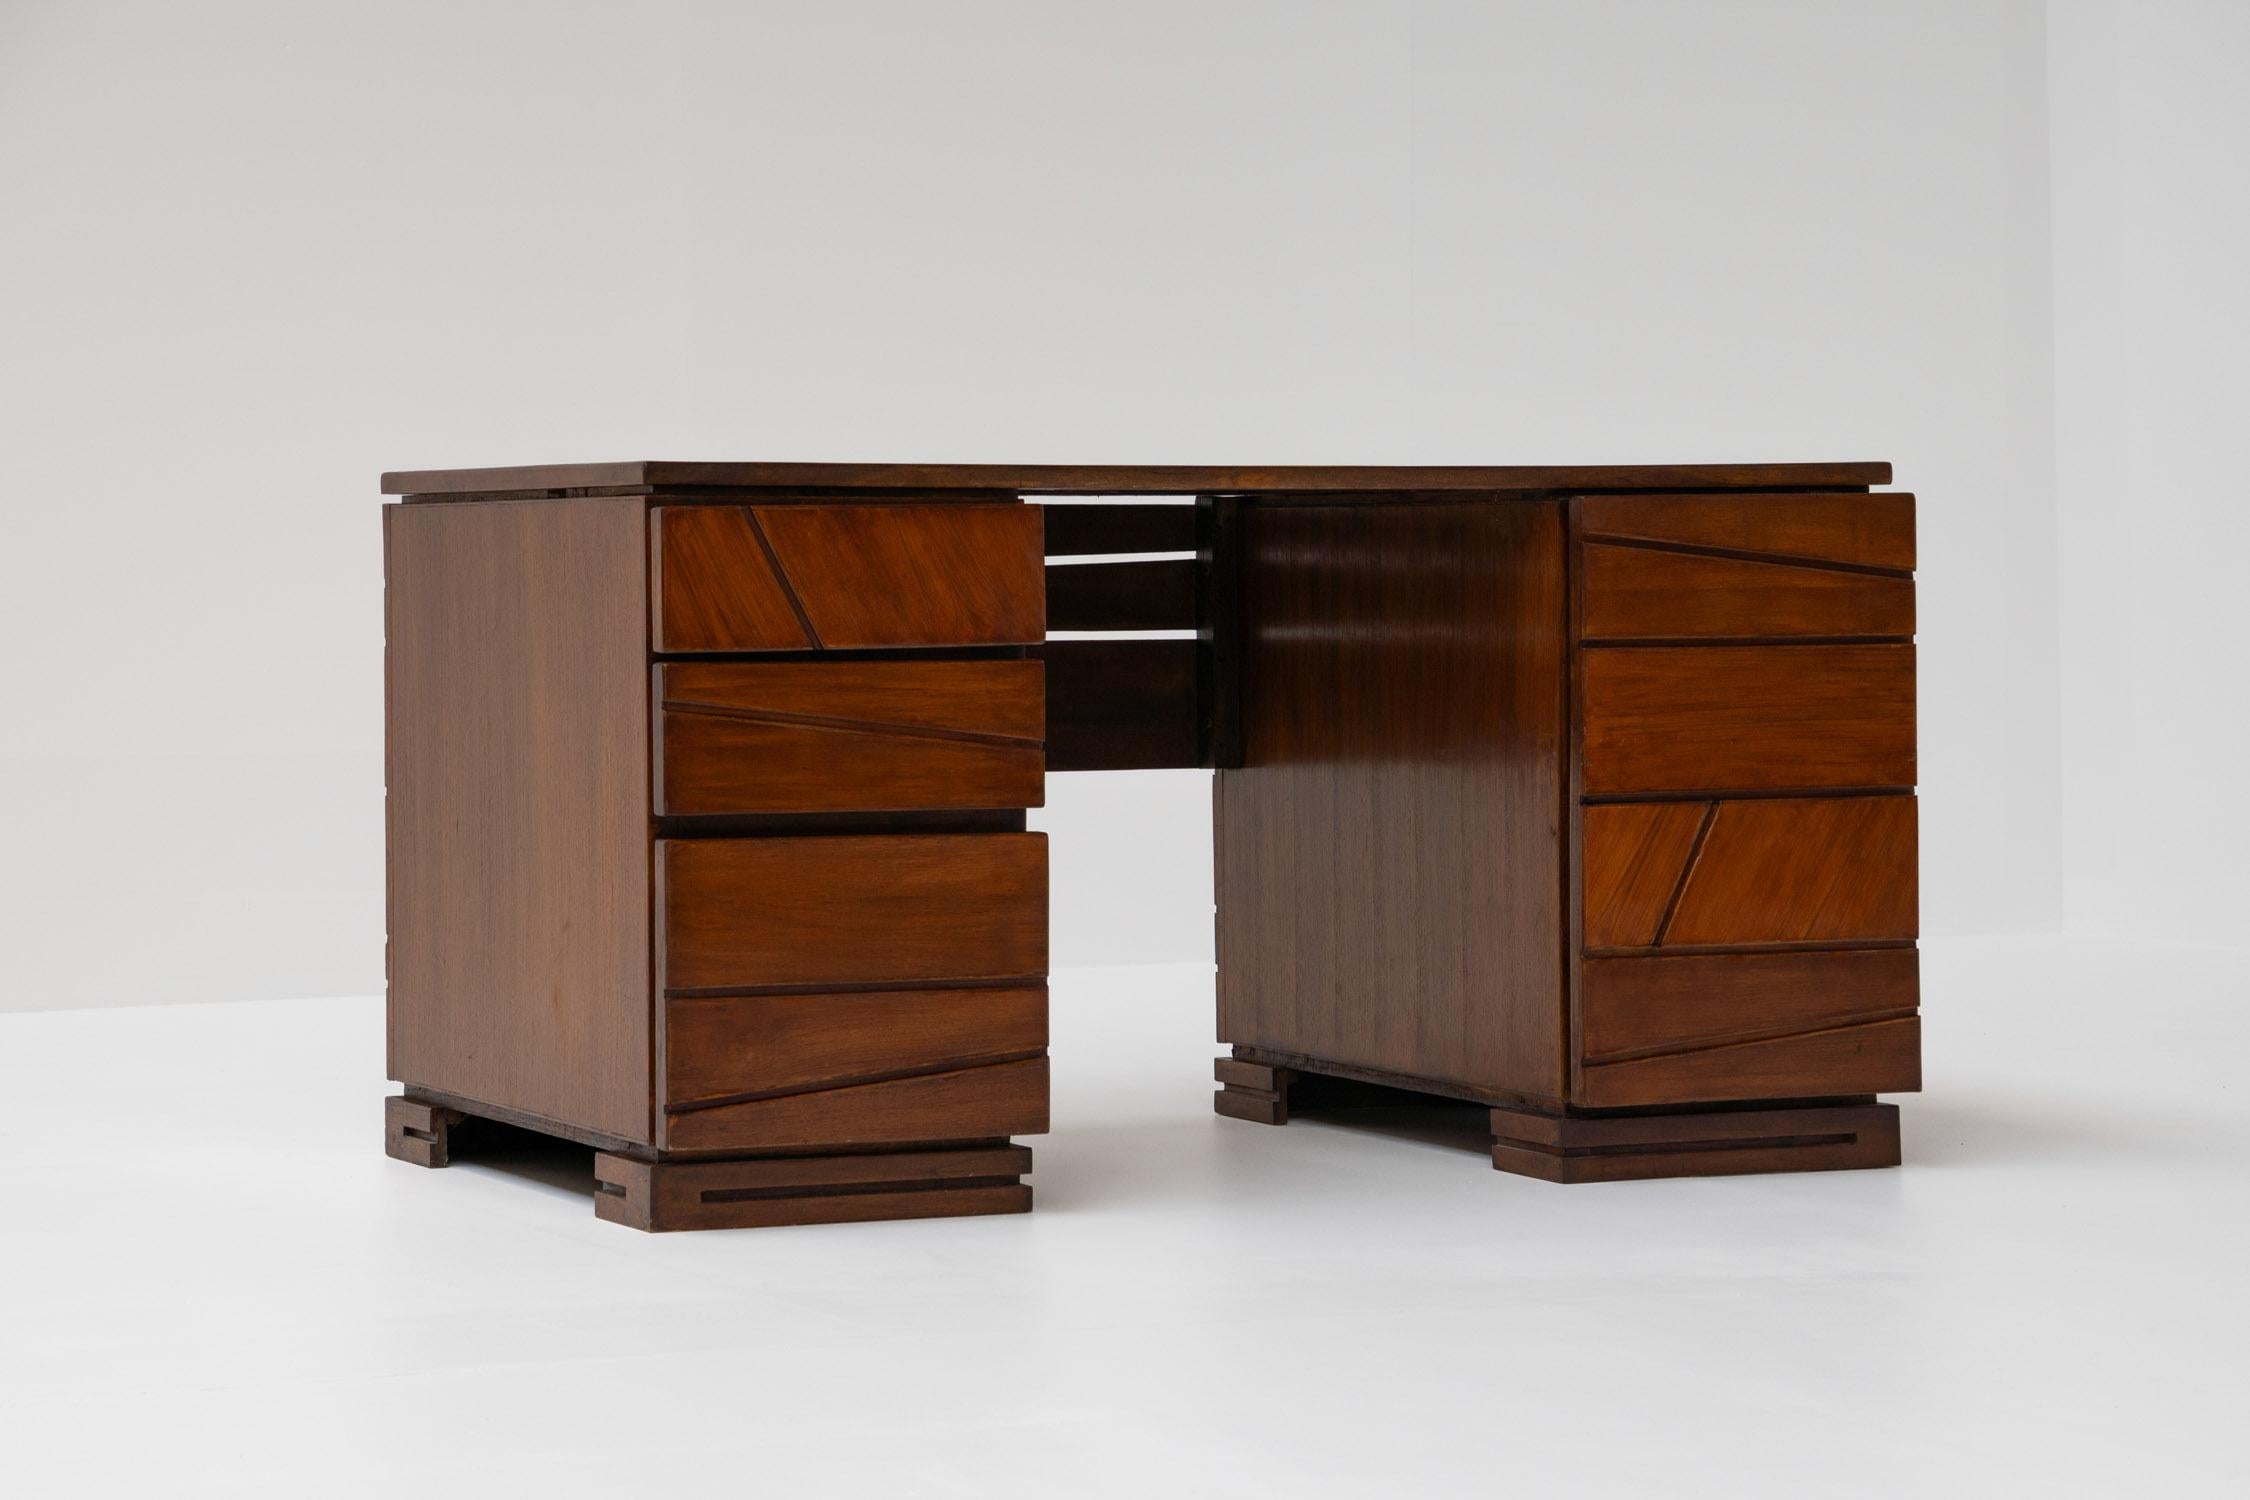 Probably one-of-a-kind, this desk has been crafted with precision and care. It features clean lines and impeccable craftsmanship. Its sleek silhouette exudes an air of understated luxury, making it the perfect focal point for any workspace or home